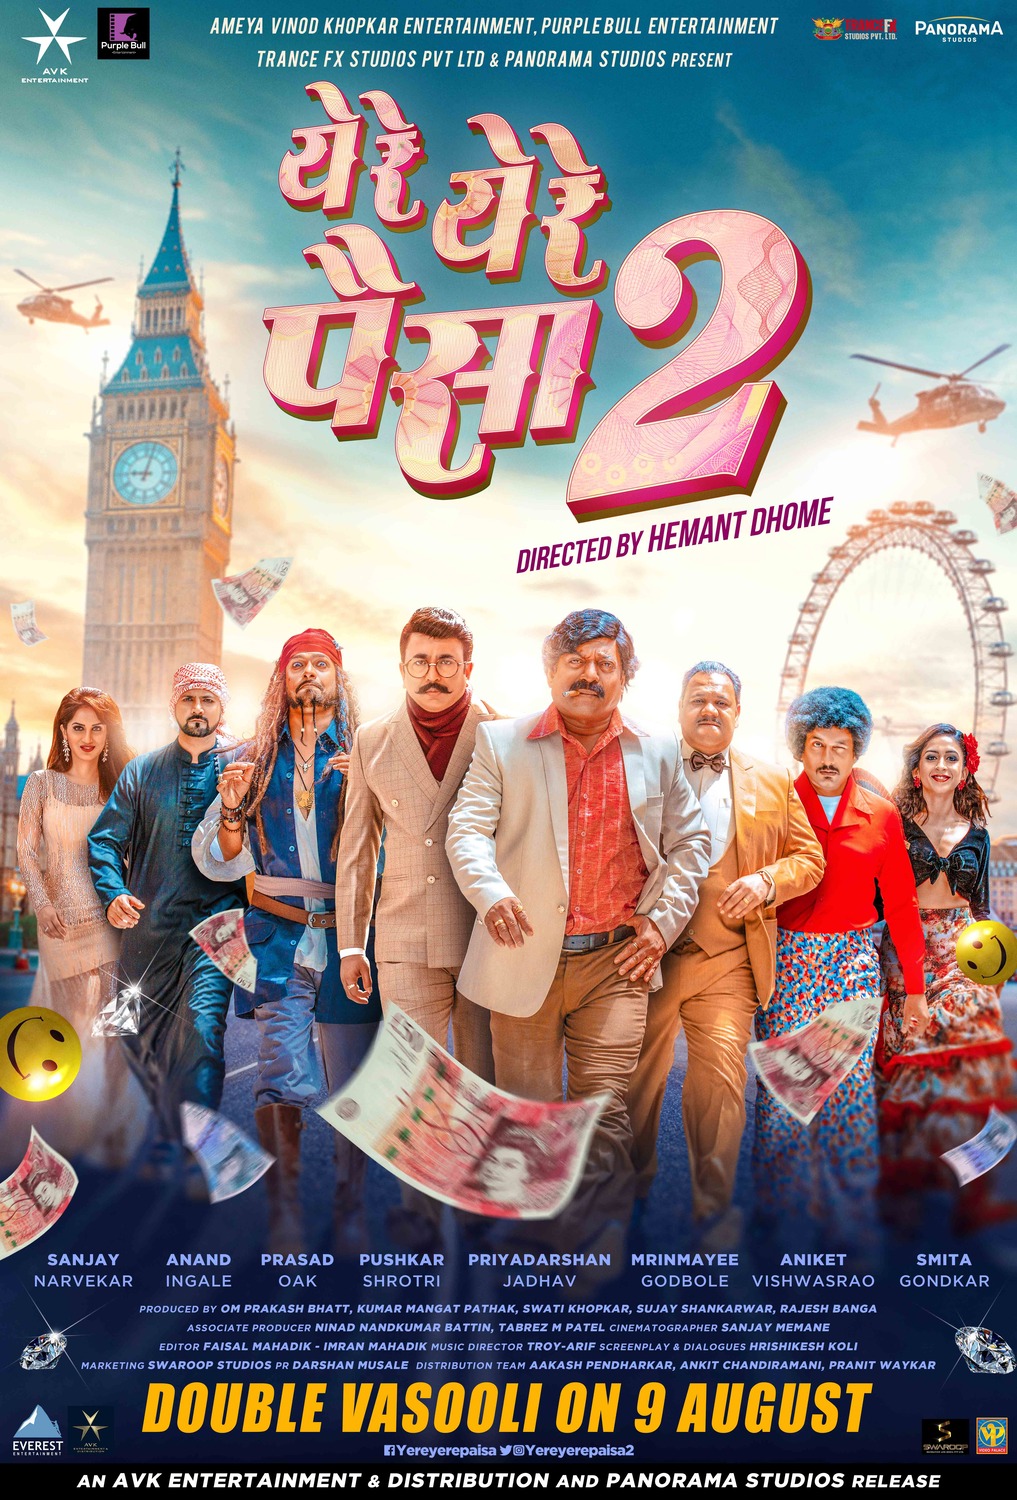 Extra Large Movie Poster Image for Ye Re Ye Re Paisa 2 